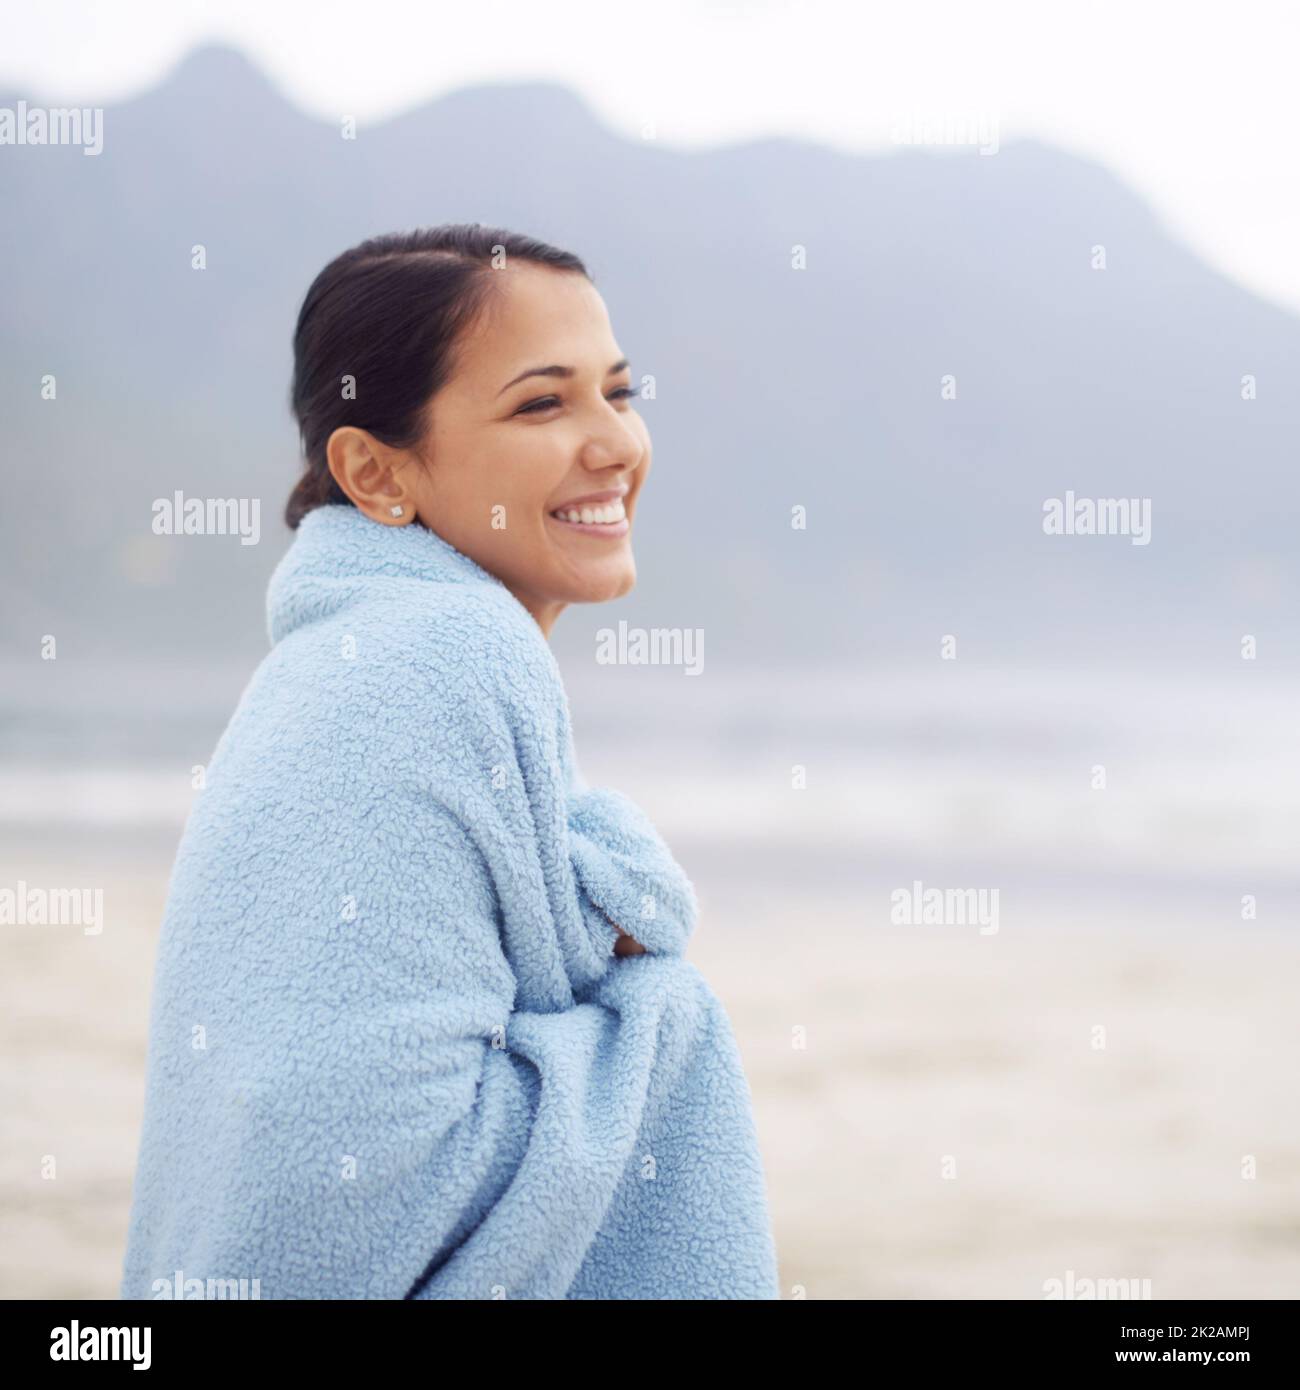 Its quiet out here on the beach. Shot of an attractive young woman sitting on the beach. Stock Photo